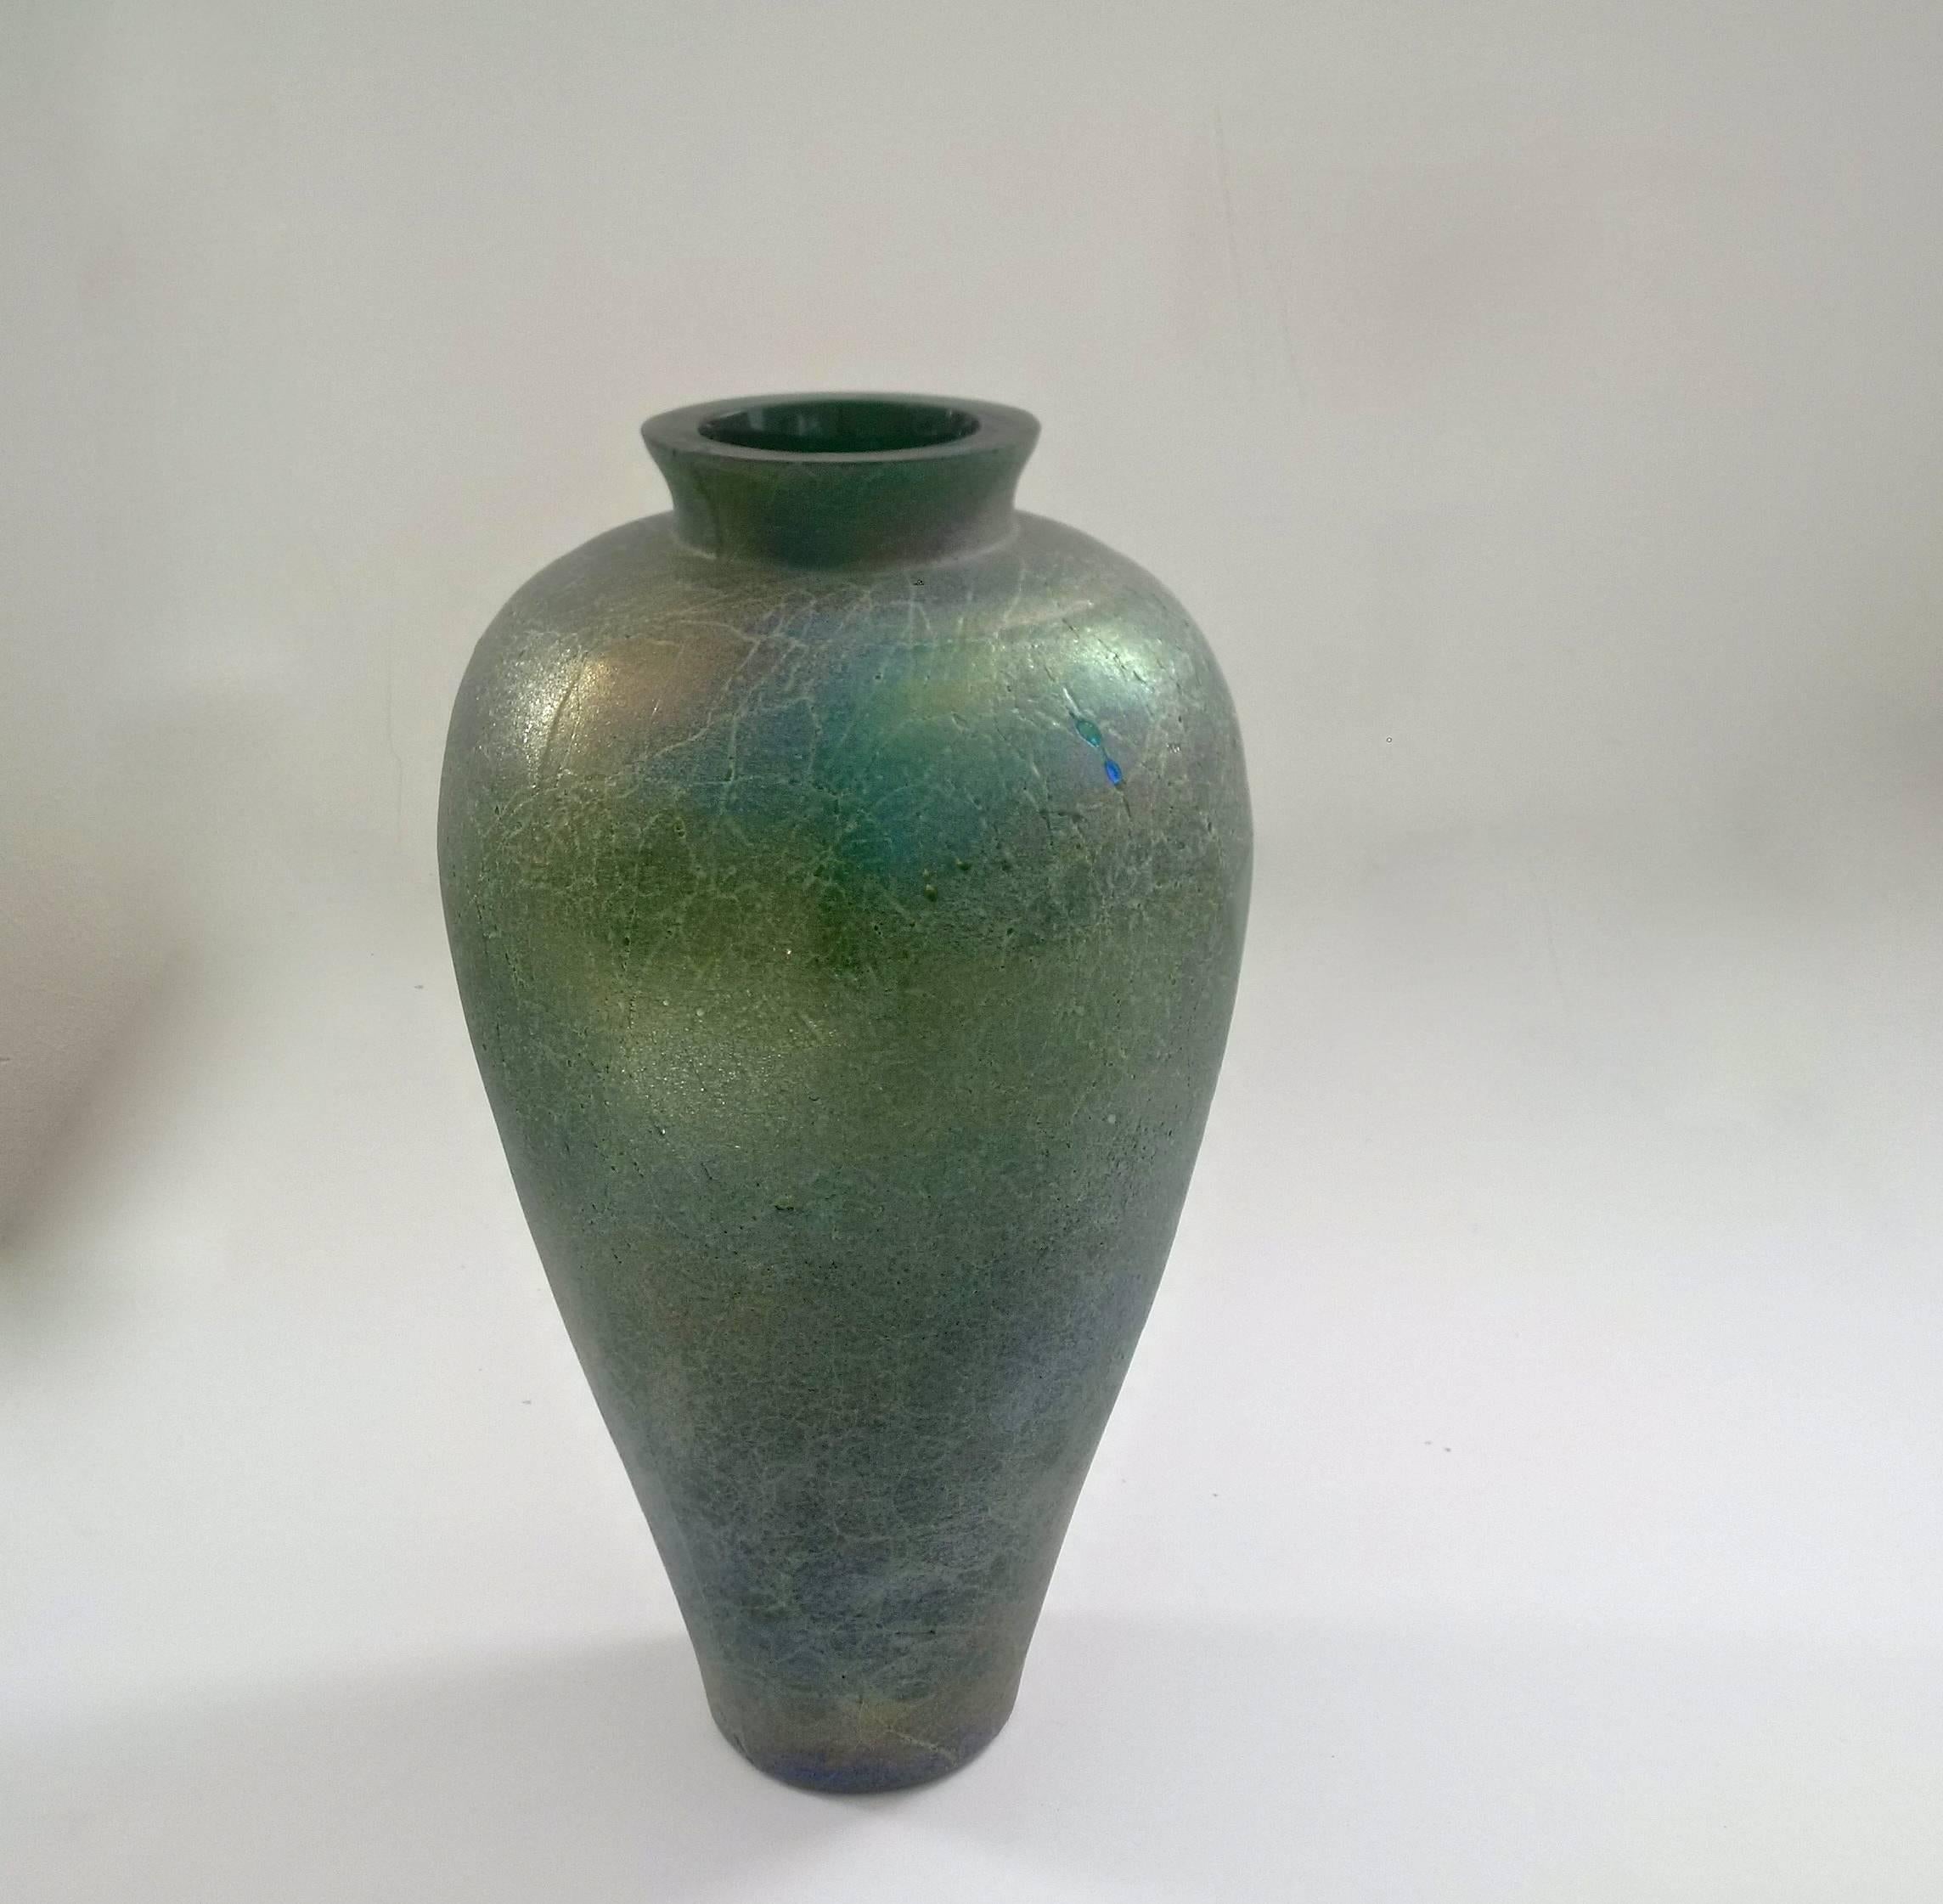 Large and beautifully Amphora shaped vase of thick emerald green glass applied with gold leaves and heavily oxidized metal particles. The Scavo technique creates the look of excavated roman glass. The iridescence lets this vase transform its colors